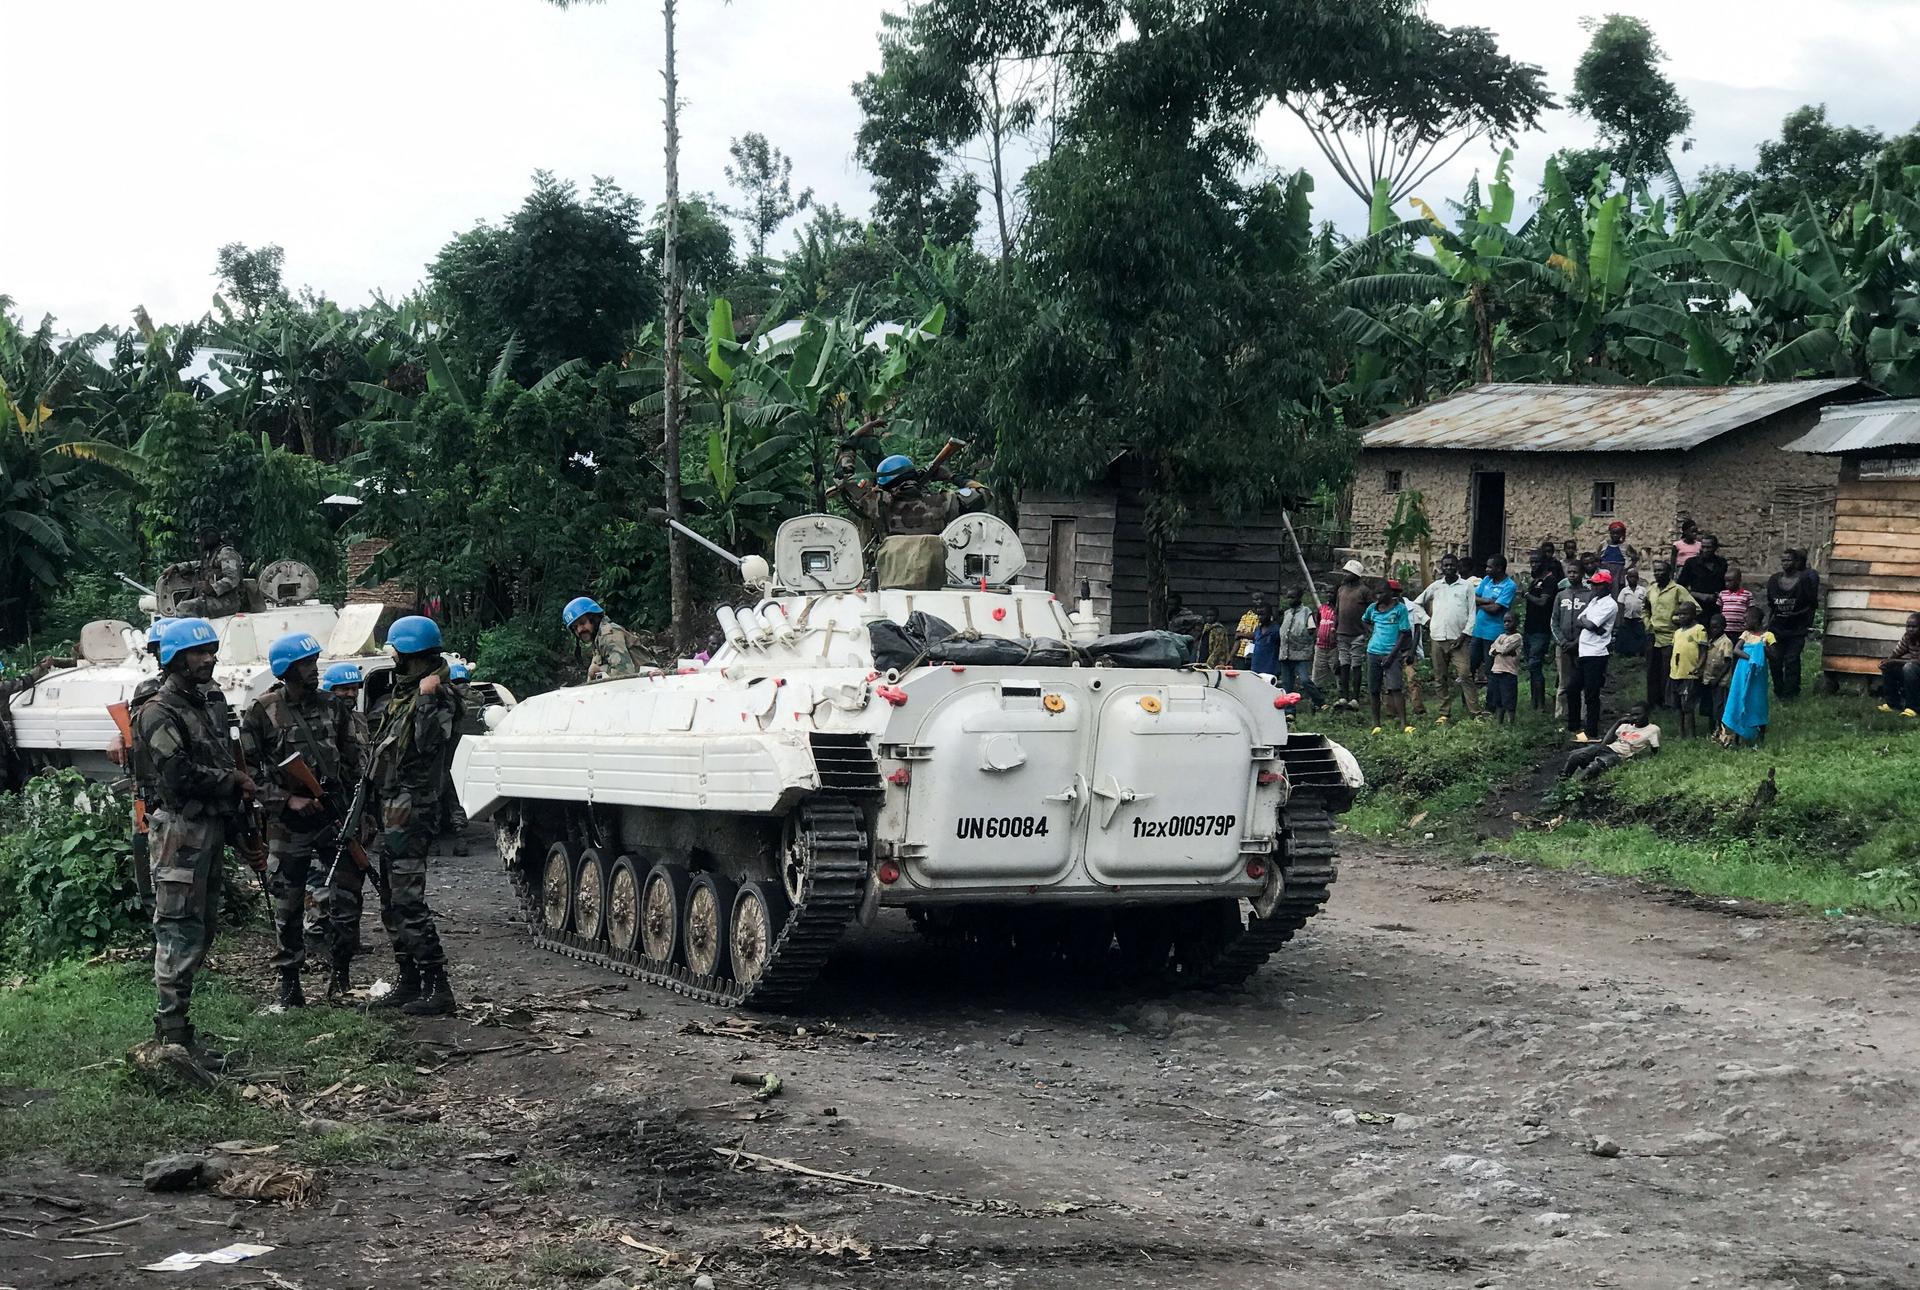 As northeast Congo reels from militia hits, church steps up peace efforts